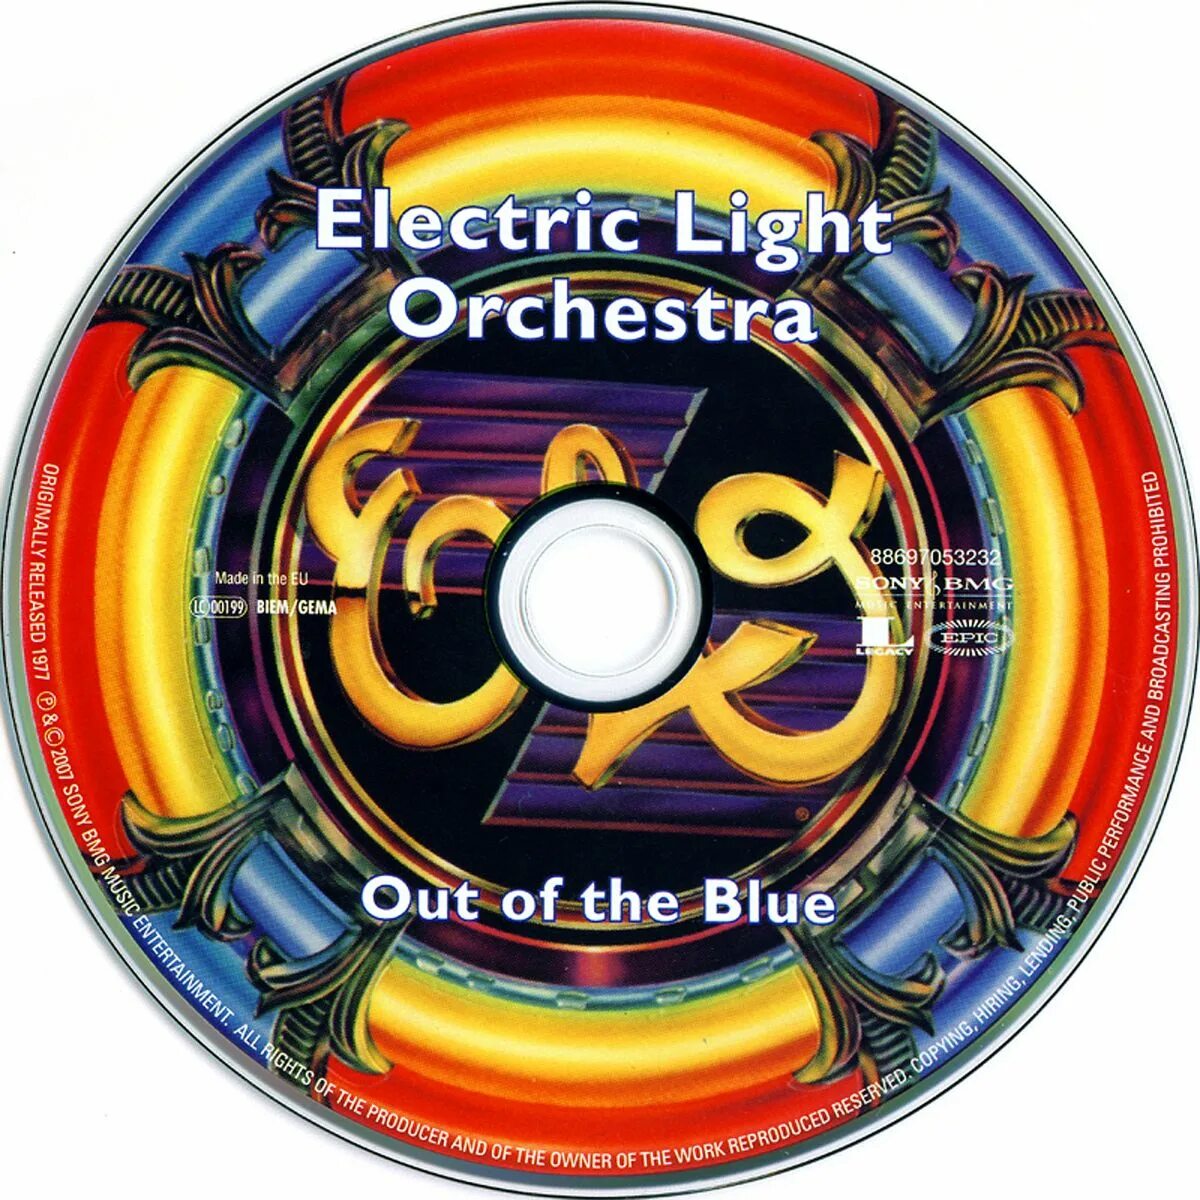 Electric Light Orchestra out of the Blue 1977. Elo out of the Blue 1977. Electric Light Orchestra - out of the Blue обложка. Elo CD. Electric blue orchestra